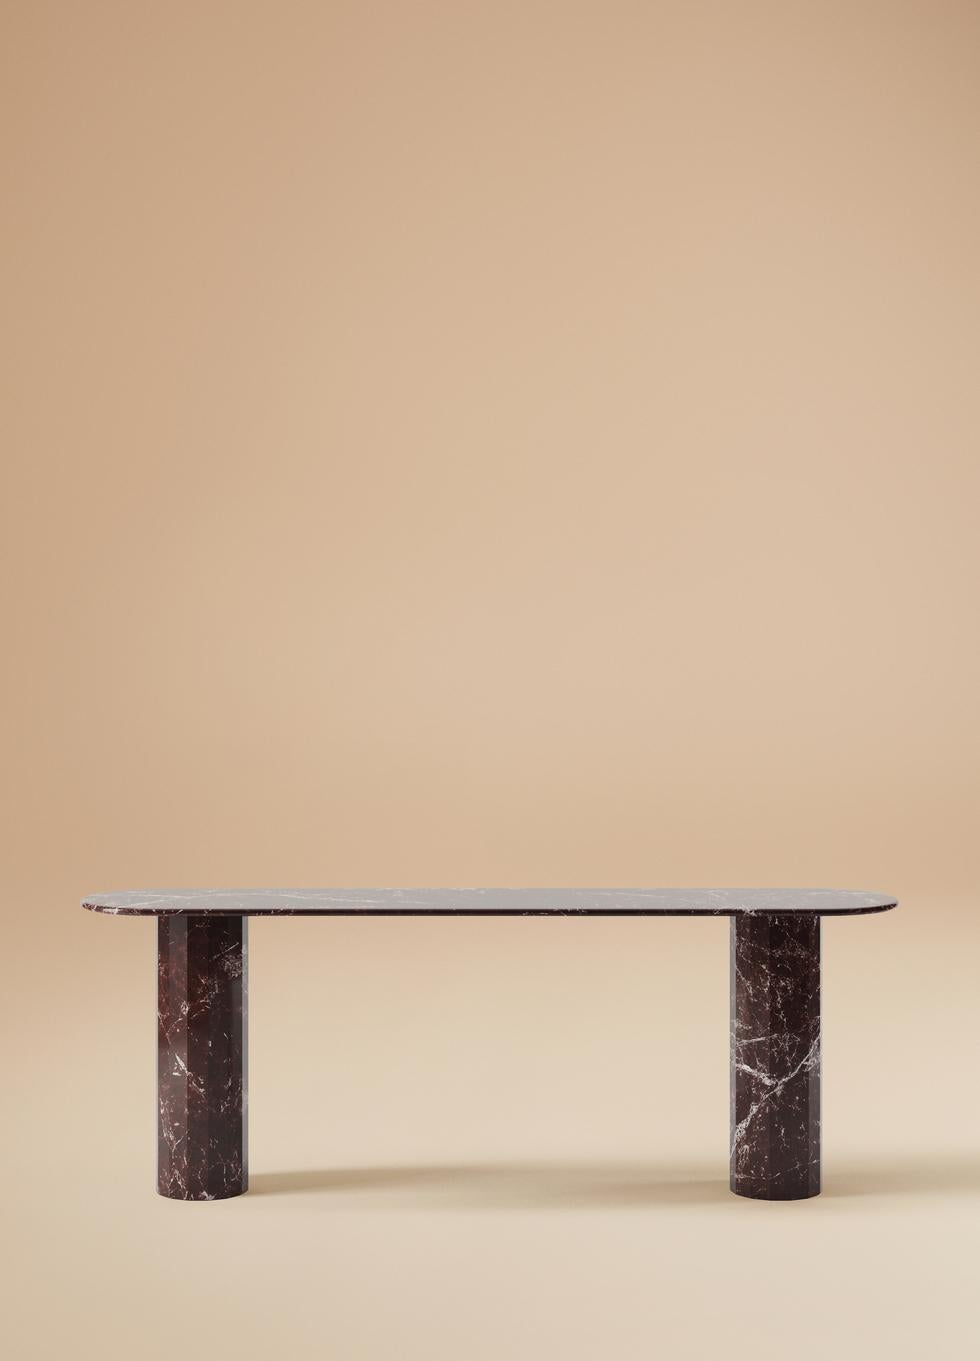 Minimalist Ashby Console Handcrafted in Polished Rosso Levanto Marble For Sale